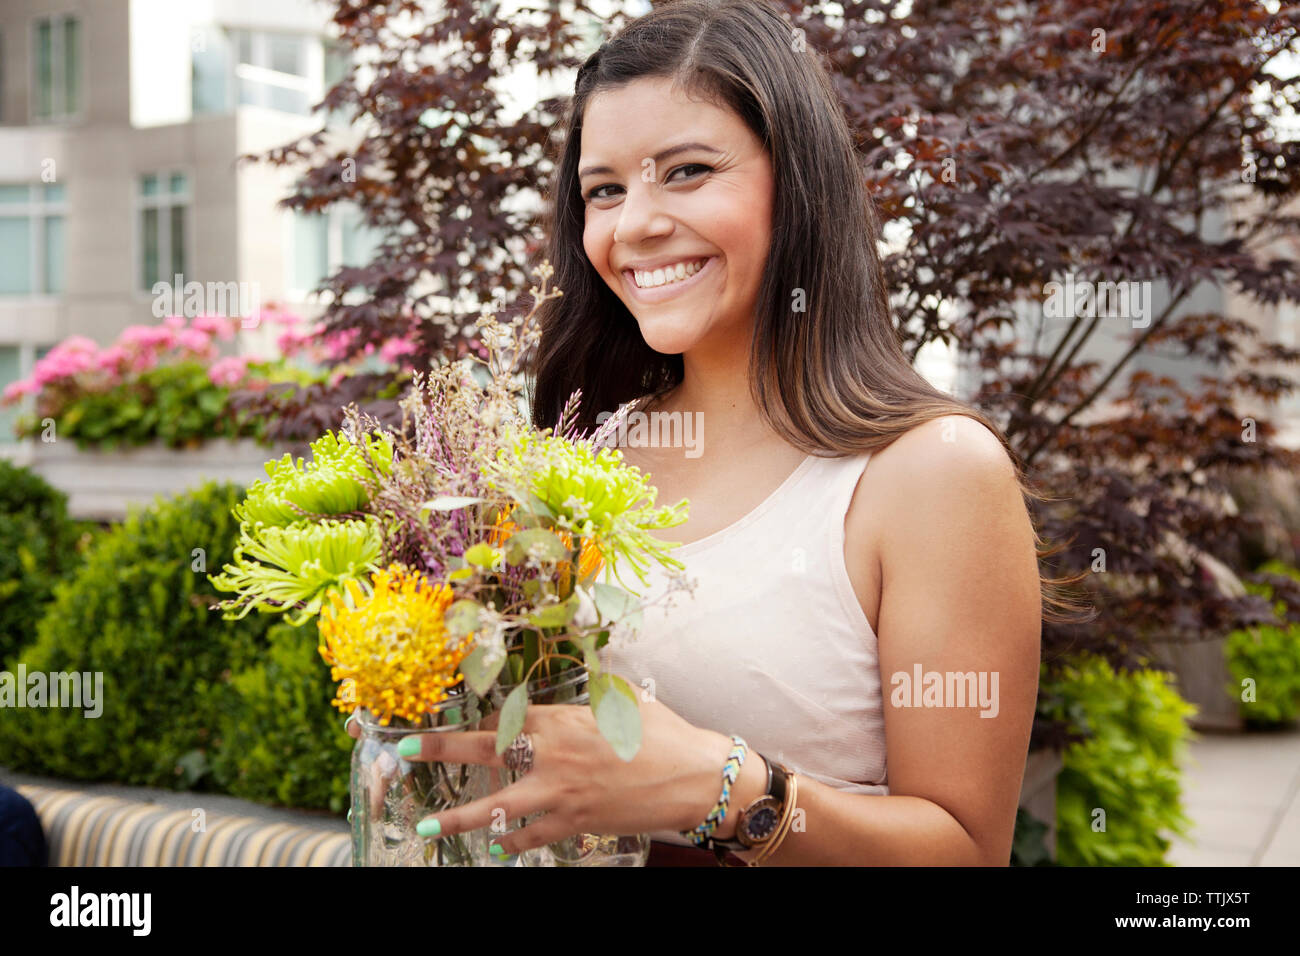 Smiling woman holding flowers jar while standing against plants Stock Photo